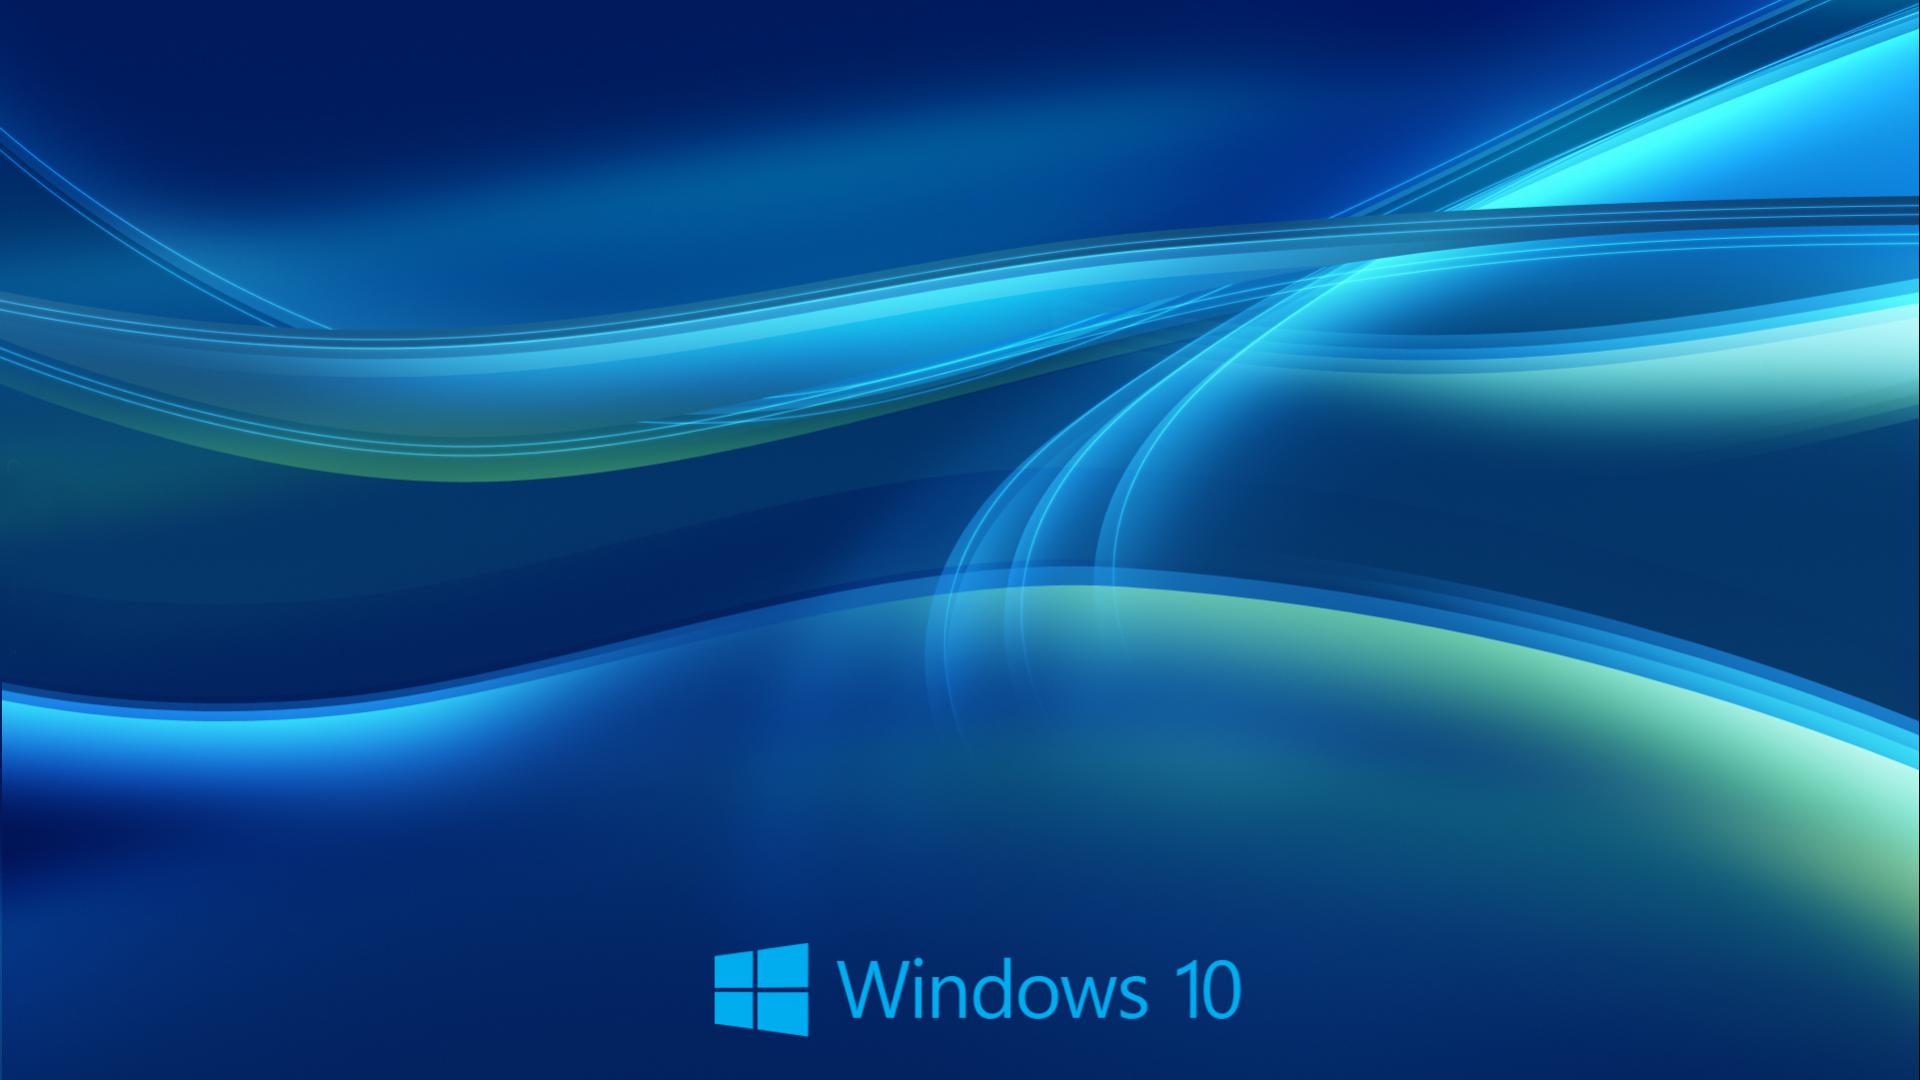 Windows 10 Wallpaper HD in Blue Abstract with New Logo HD Wallpapers